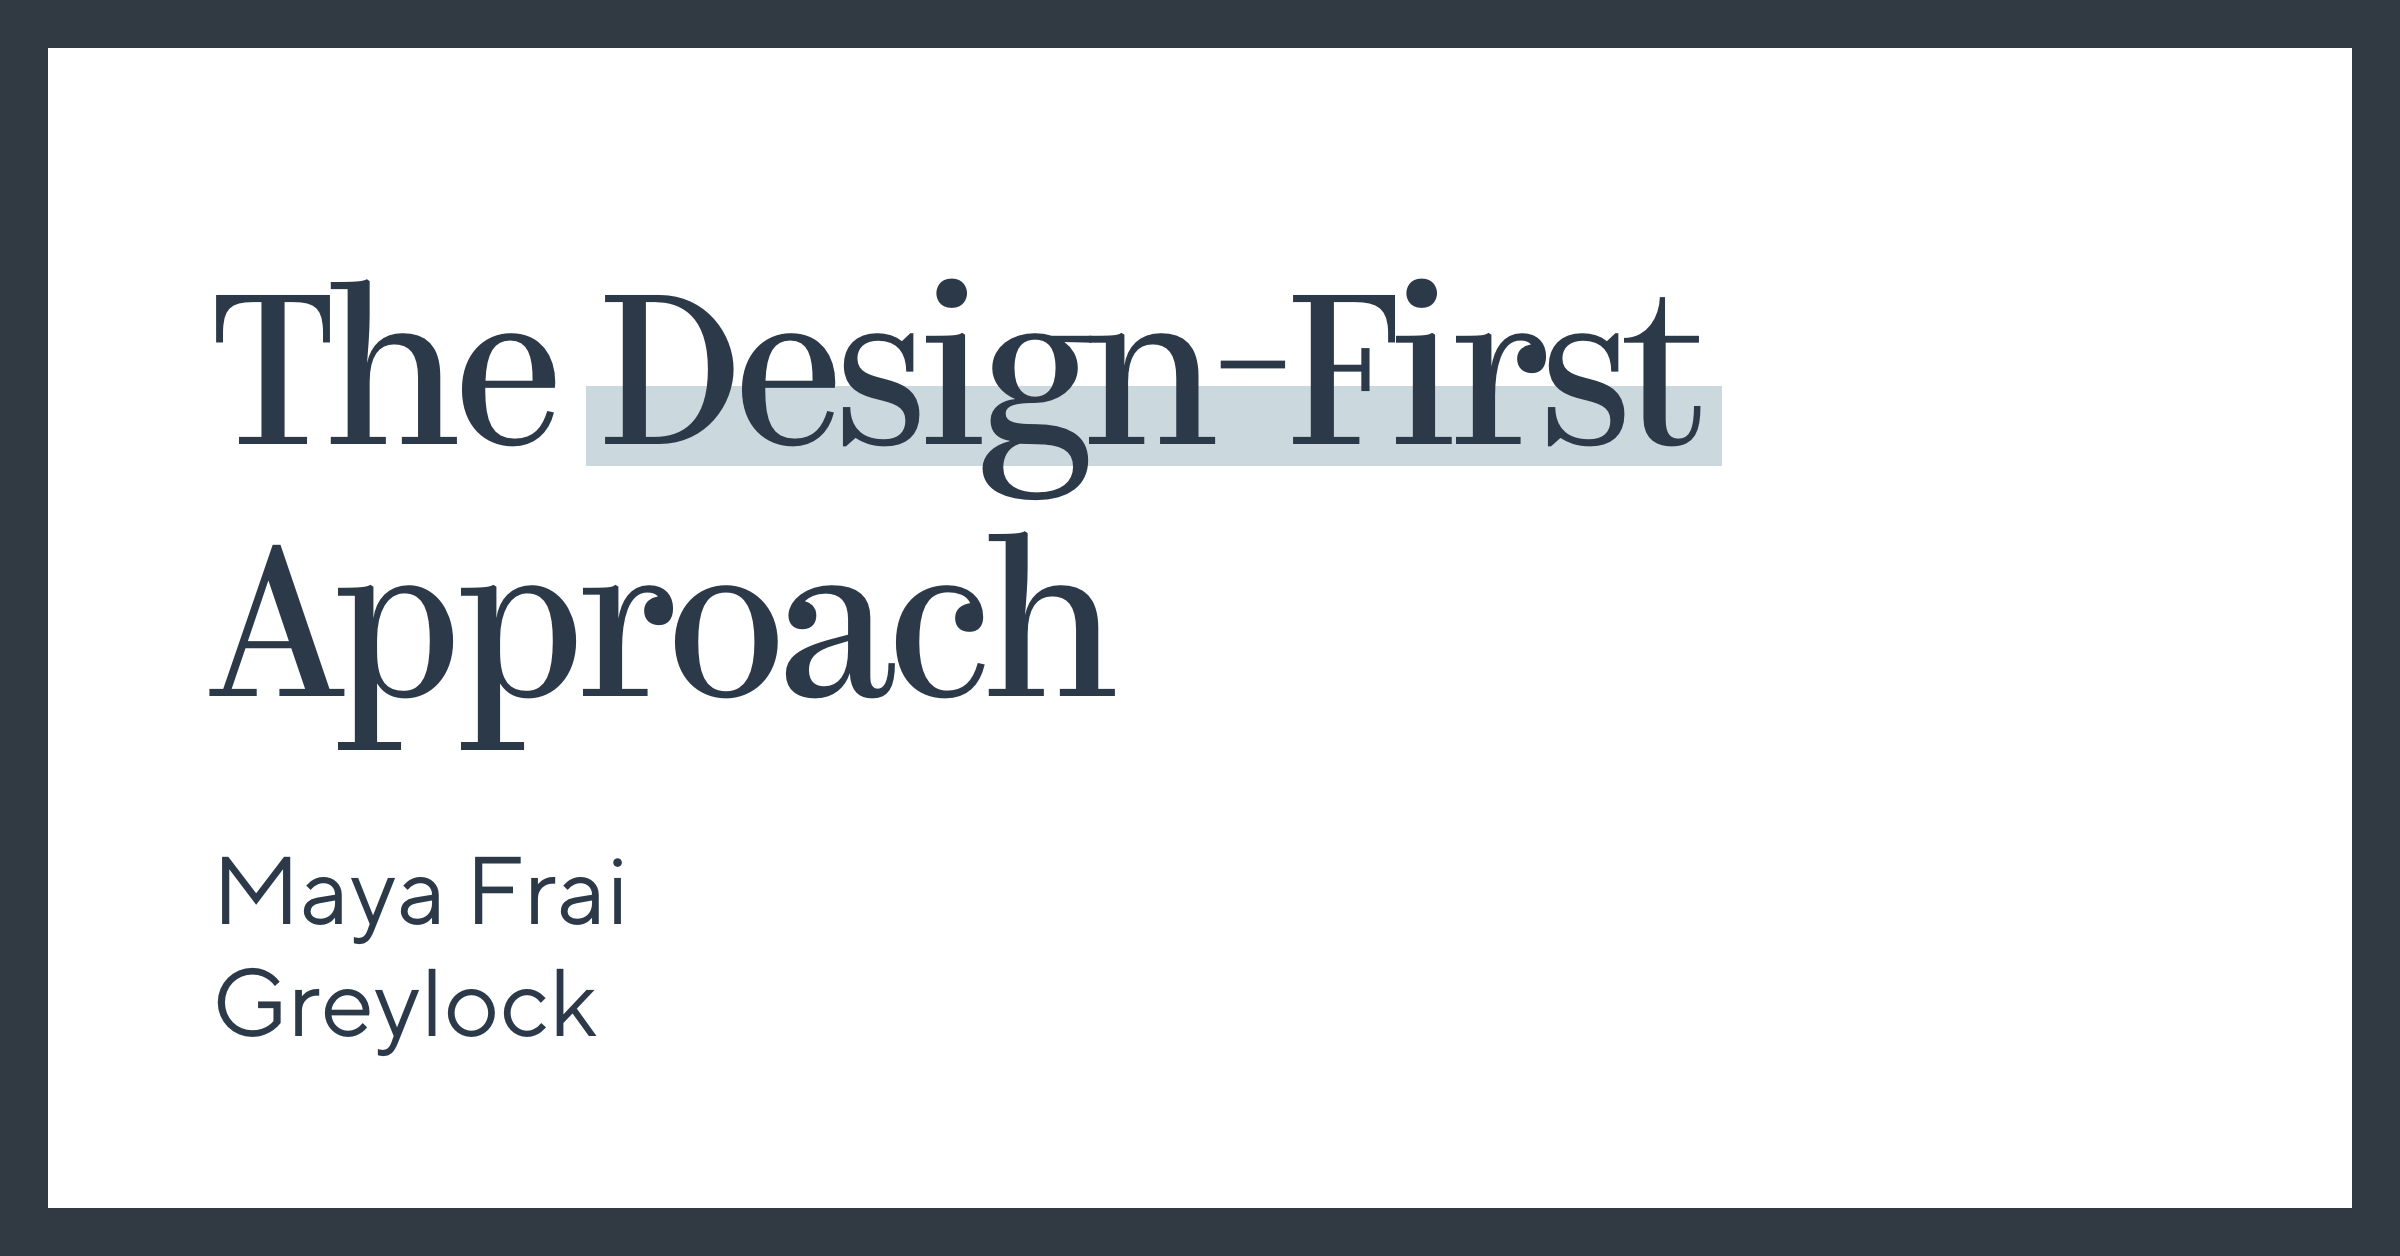 The Design-First Approach